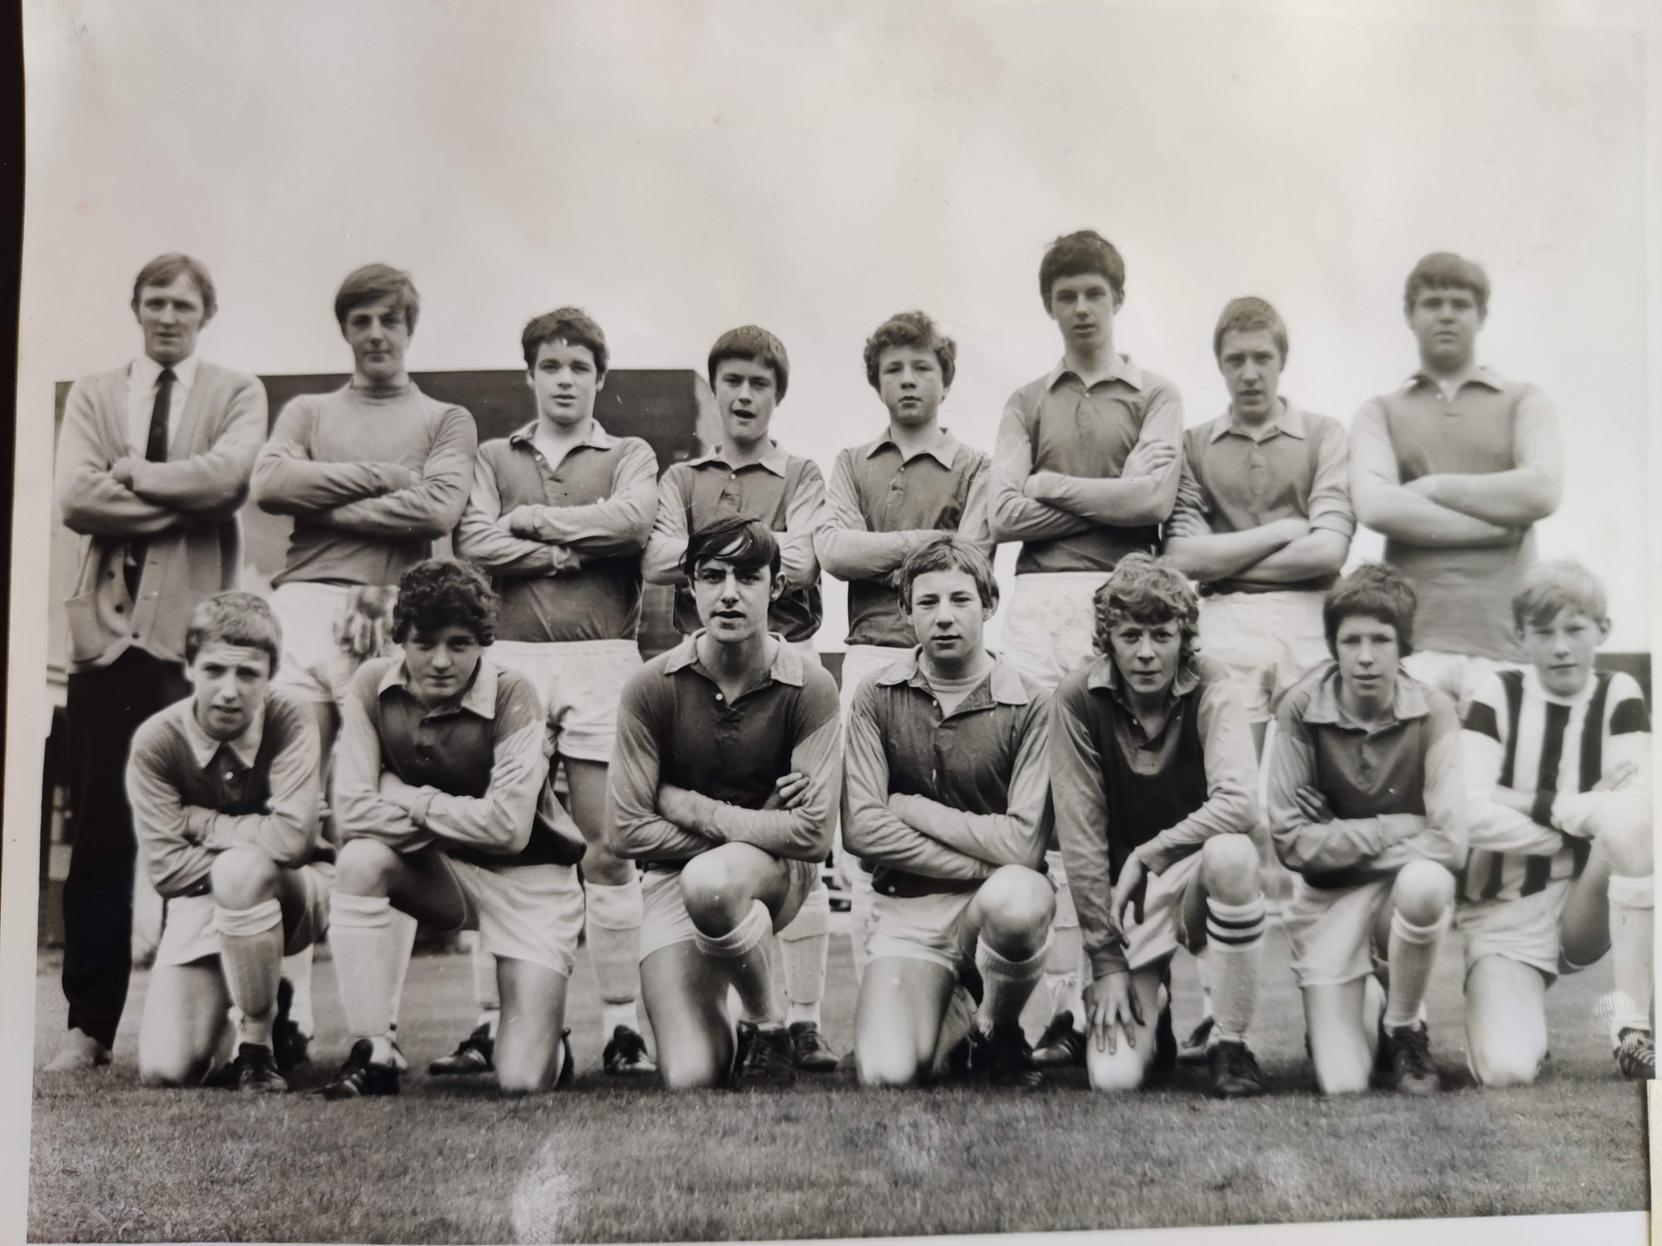 The success of Skerton football team in 1970 was the